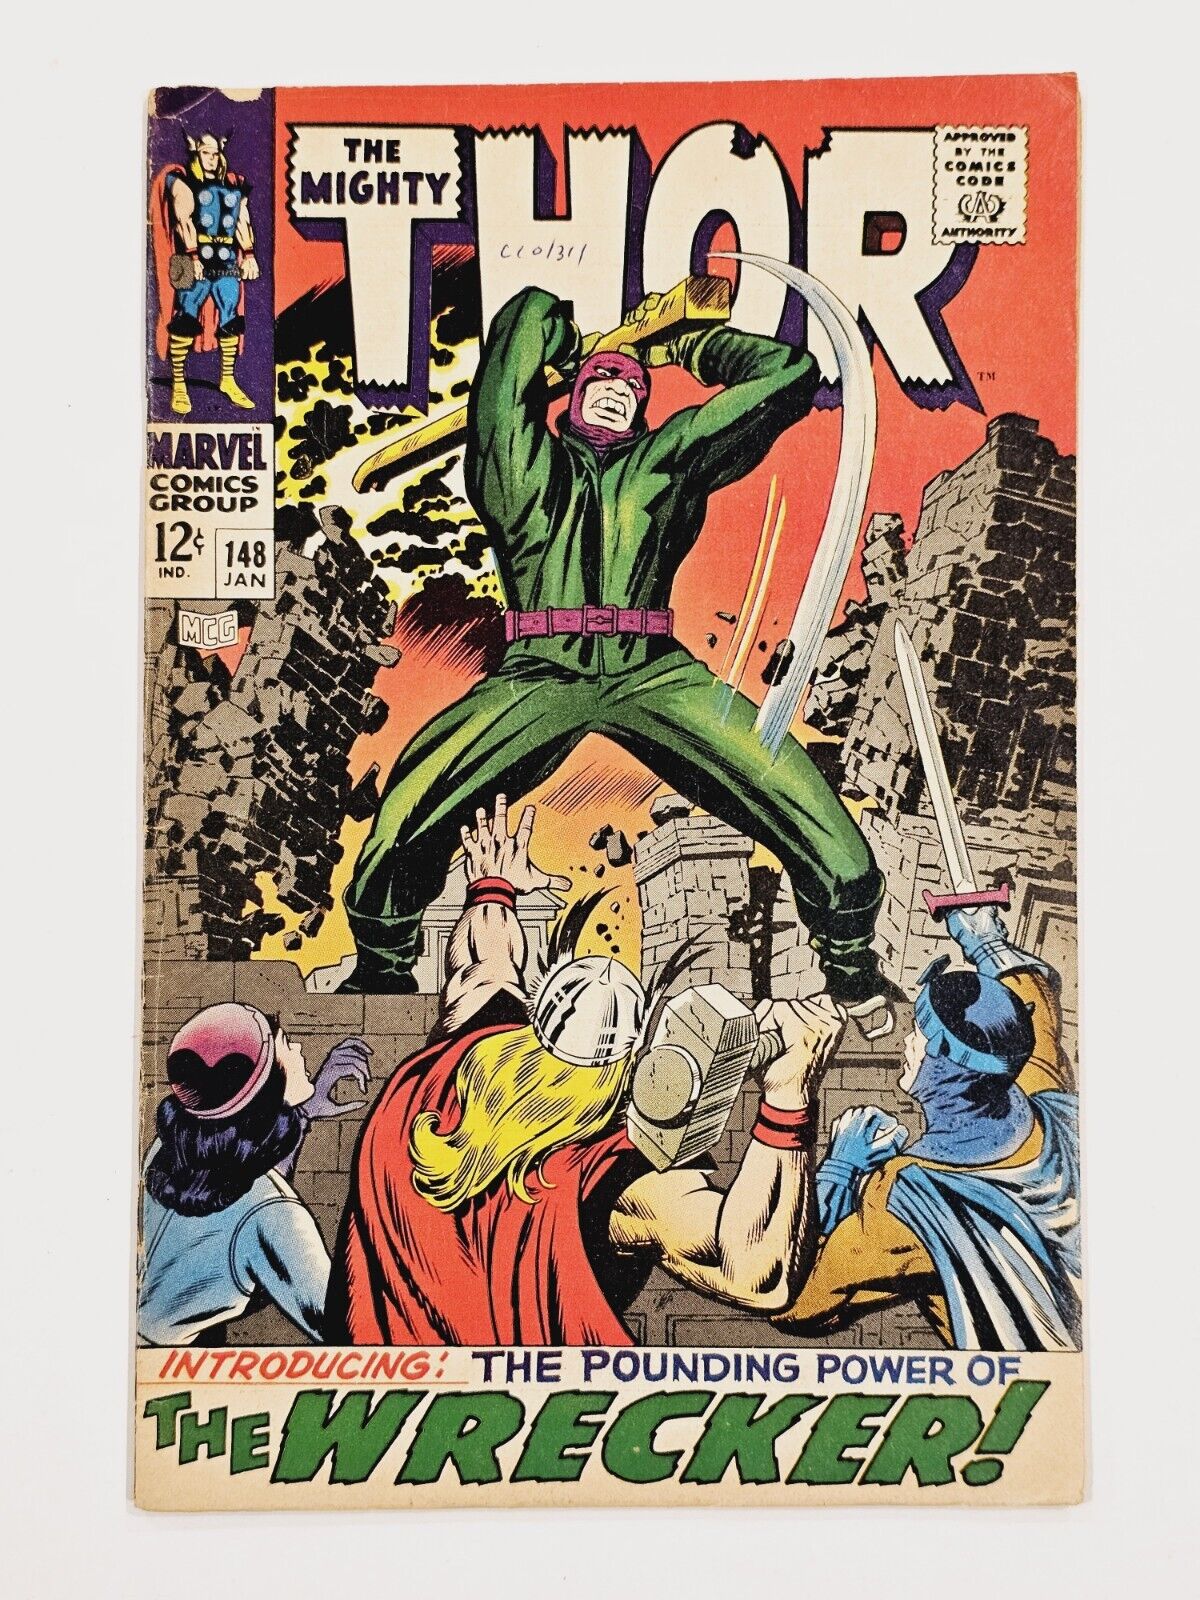 THE MIGHTY THOR #148 KEY 1st Appearance The Wrecker - Jack Kirby - Marvel 1968